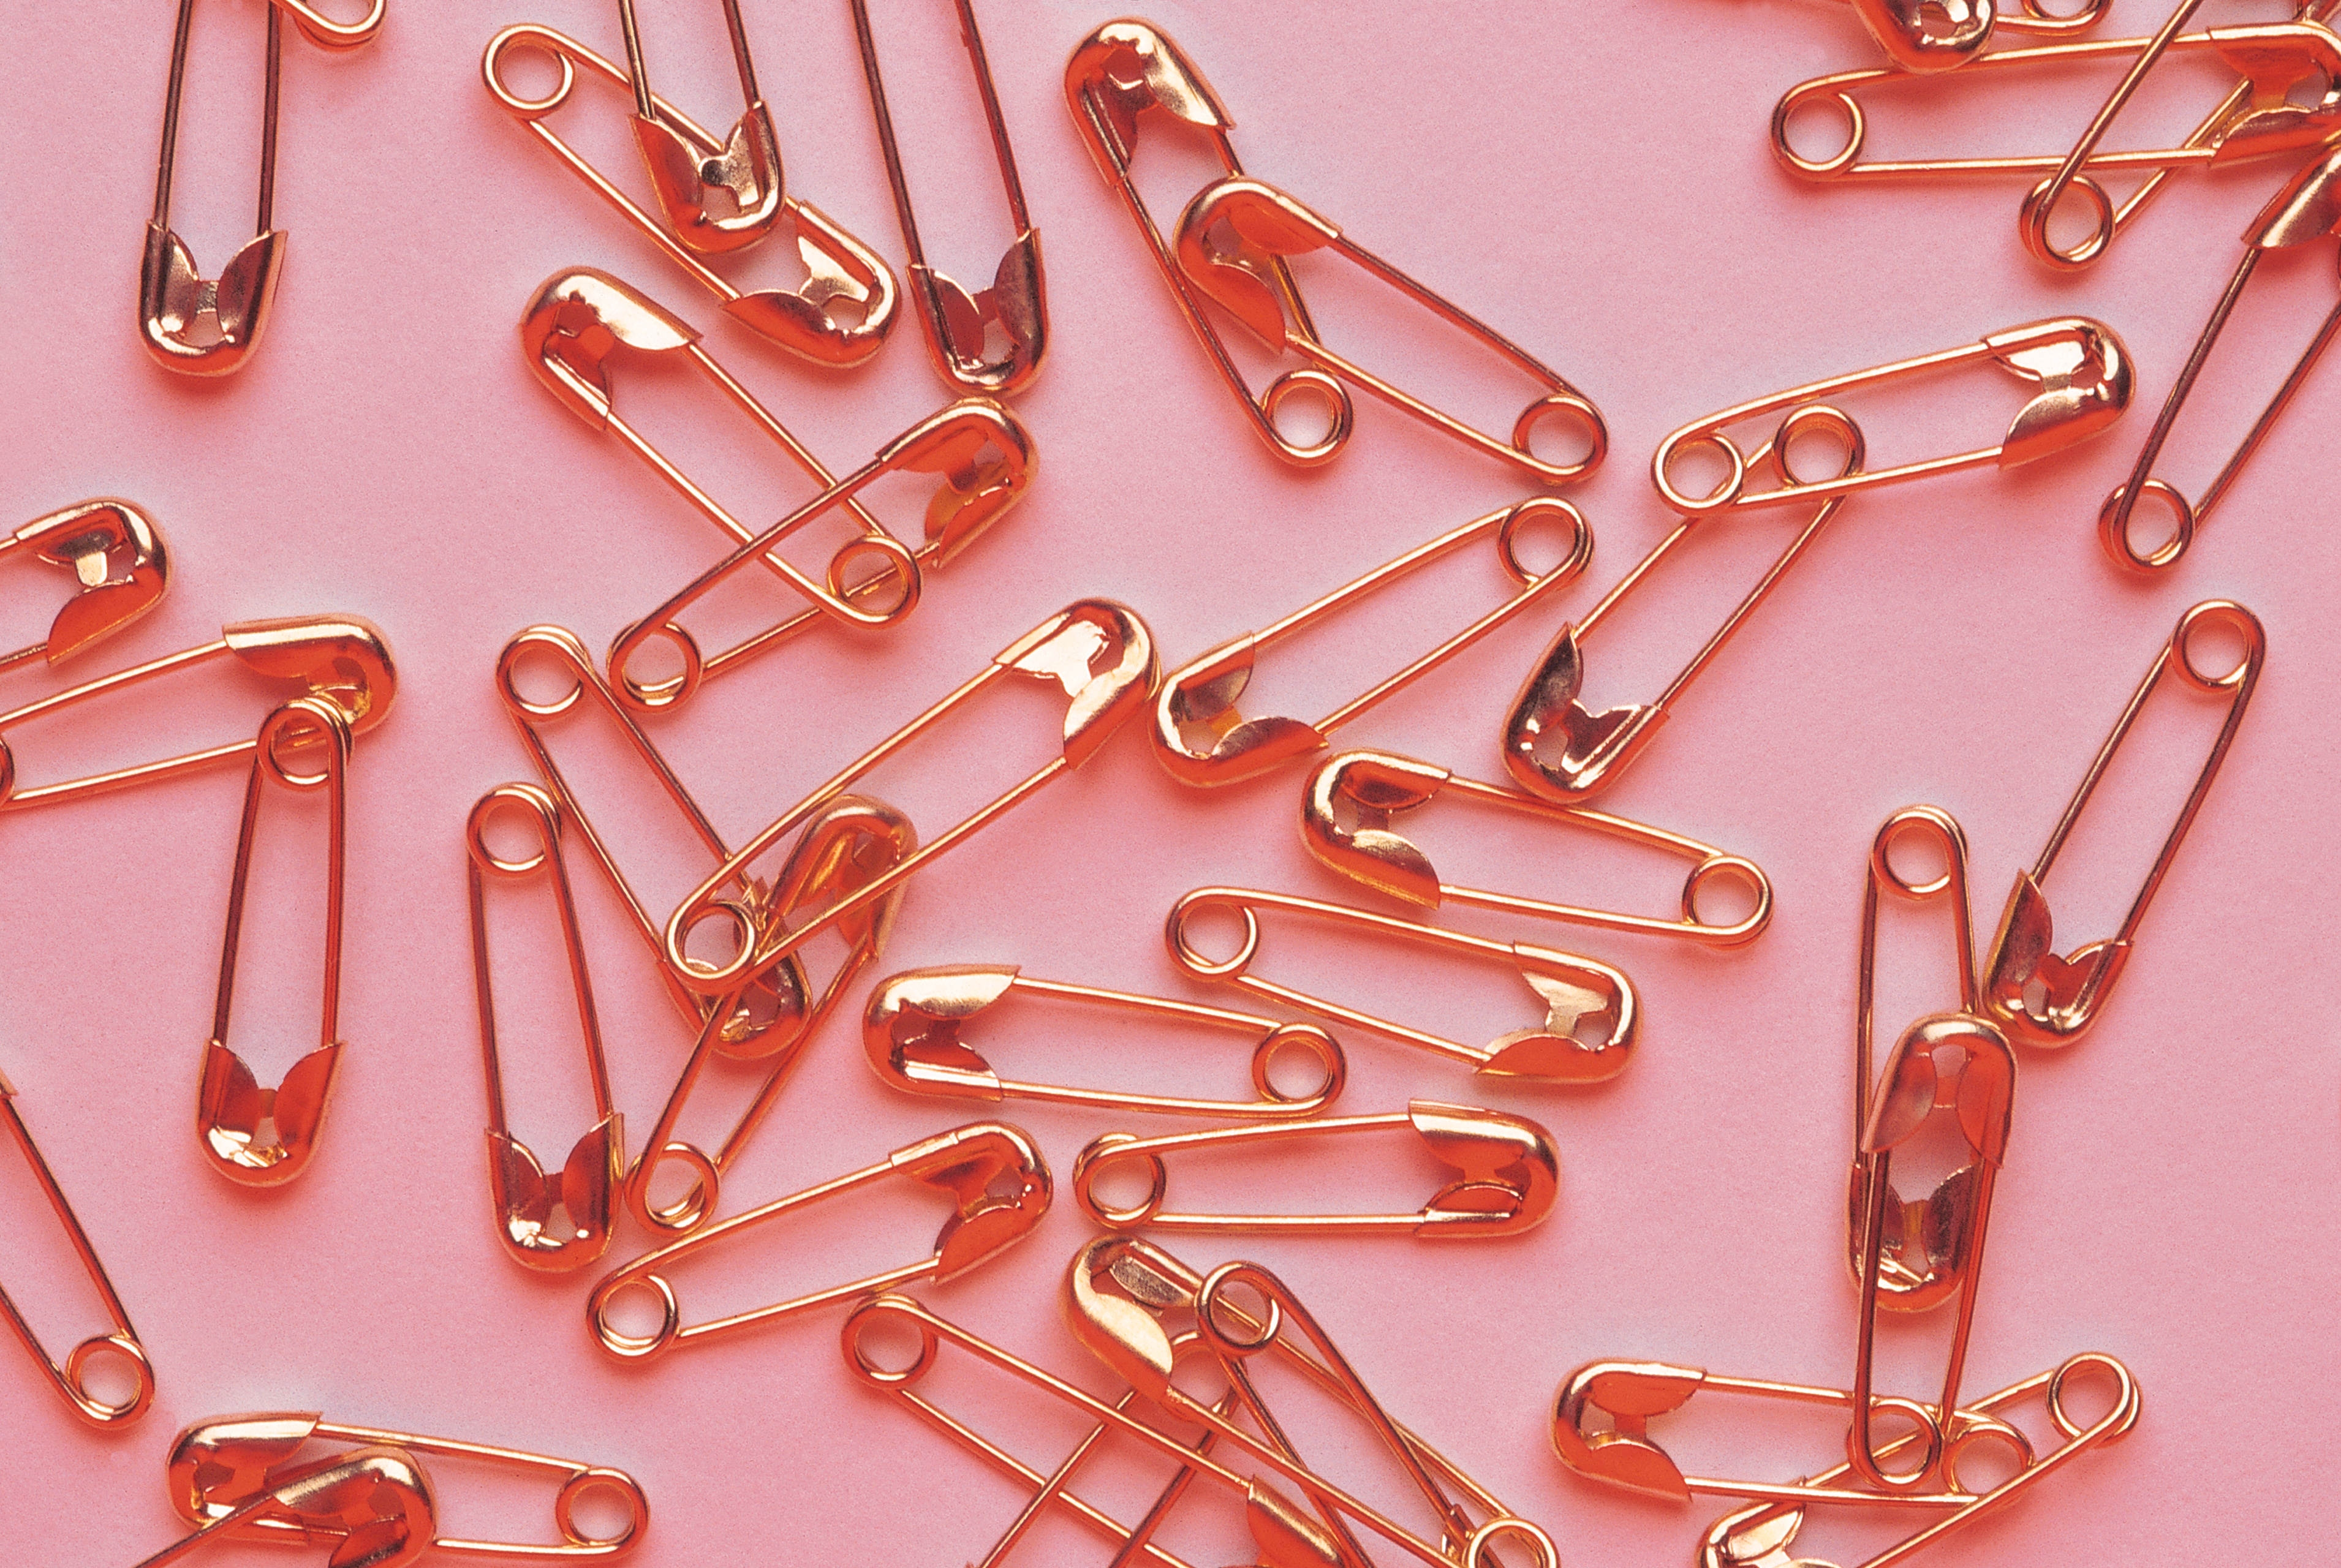 metal, gold, pink background, miscellanea, miscellaneous, pins, safety pins QHD